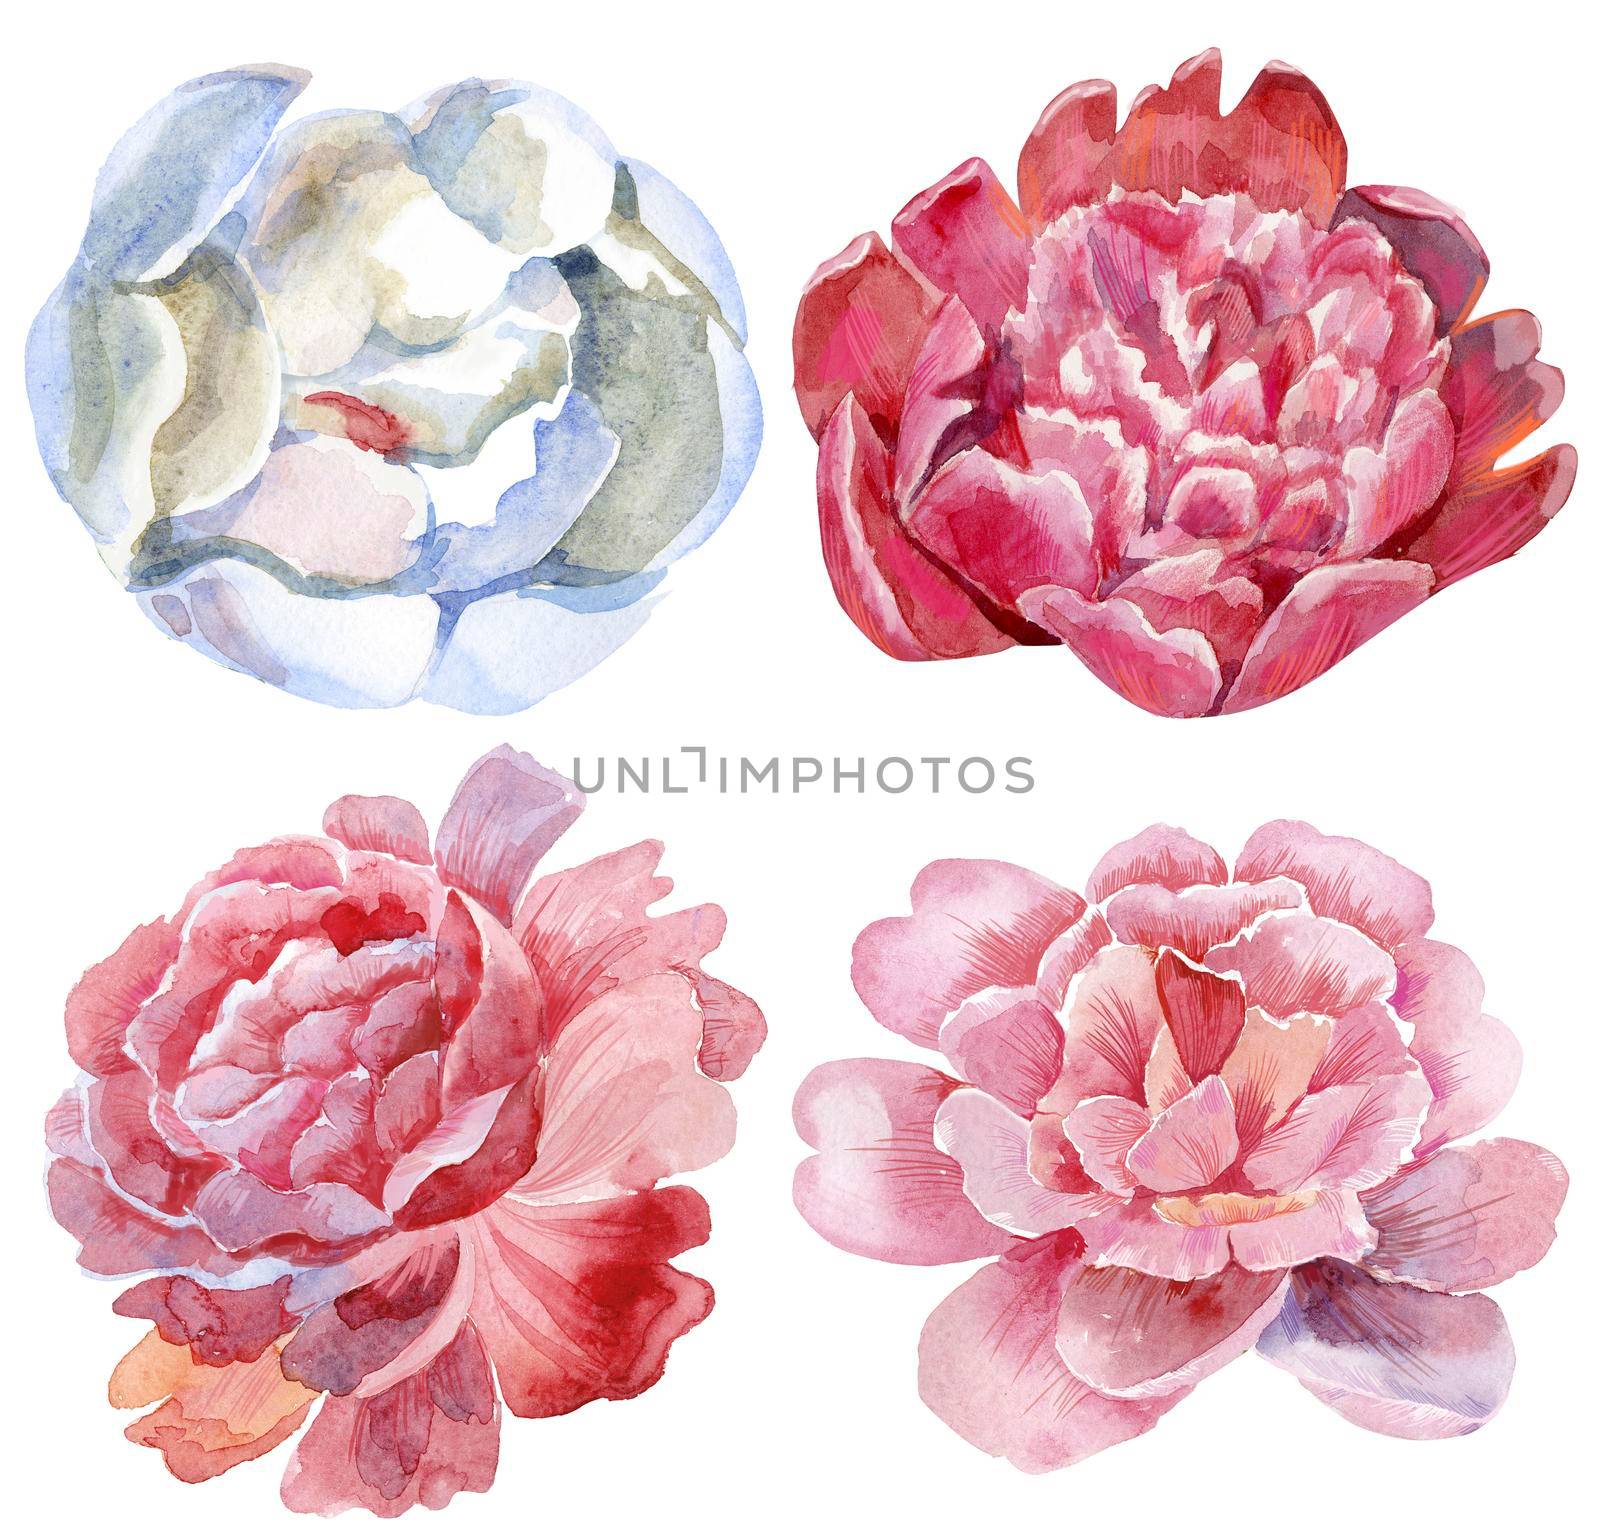 Watercolor peony set. Vintage floral elements with peony flowers and leaves isolated on white background. Hand drawn